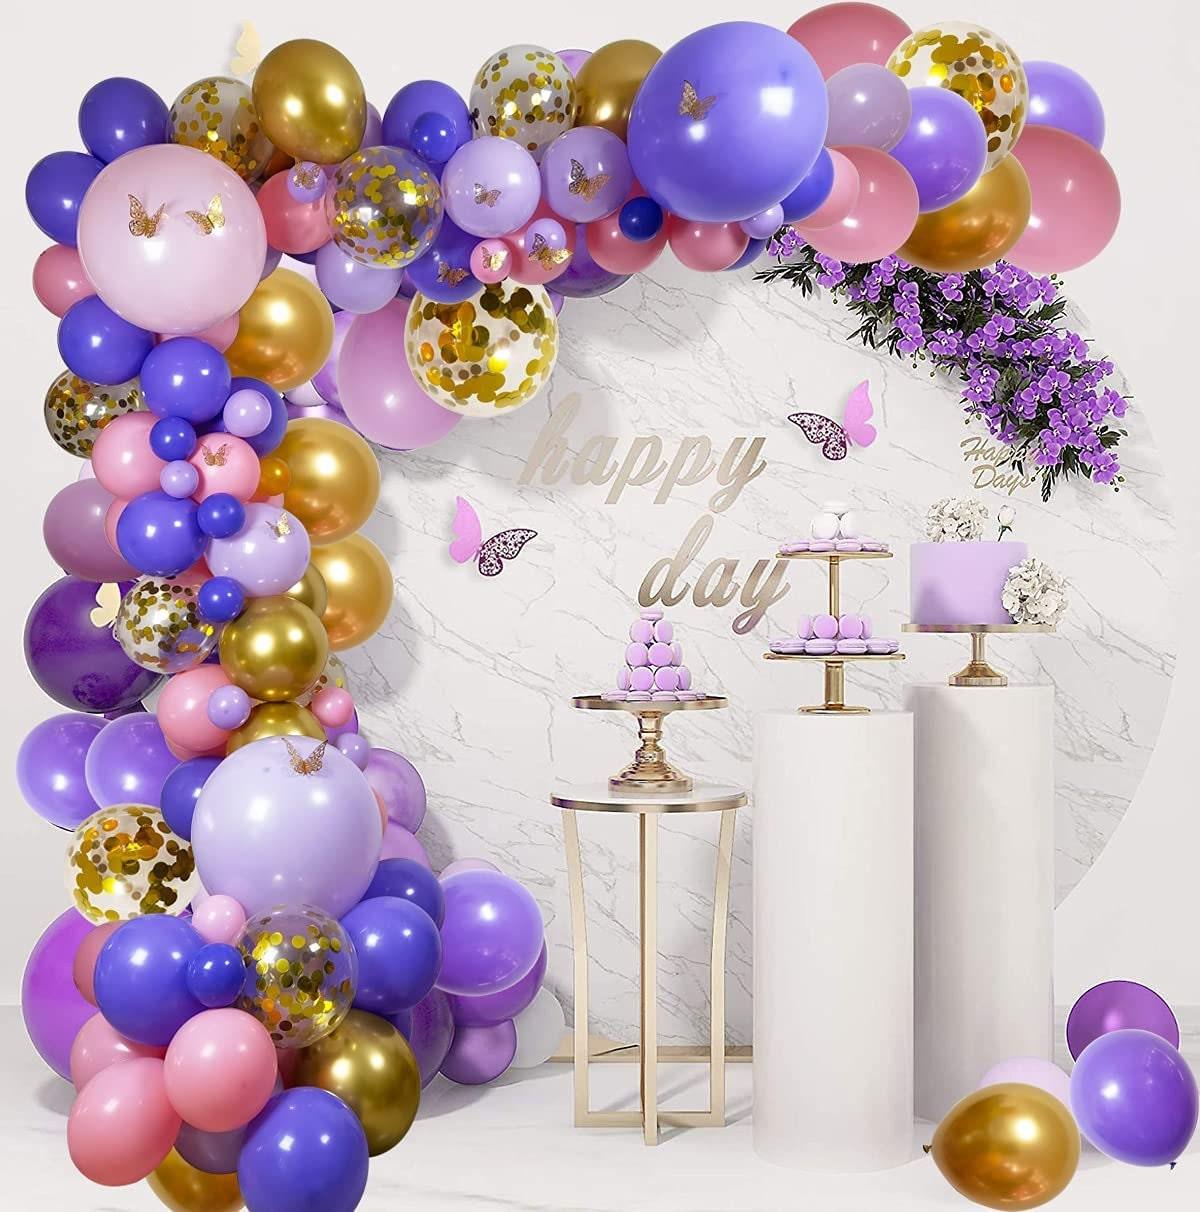 114pcs Pink and Purple Balloons Garland Arch Kit for Engagement Wedding Baby Shower Birthday Party Anniversary Celebration Butterfly Decor - Lasercutwraps Shop